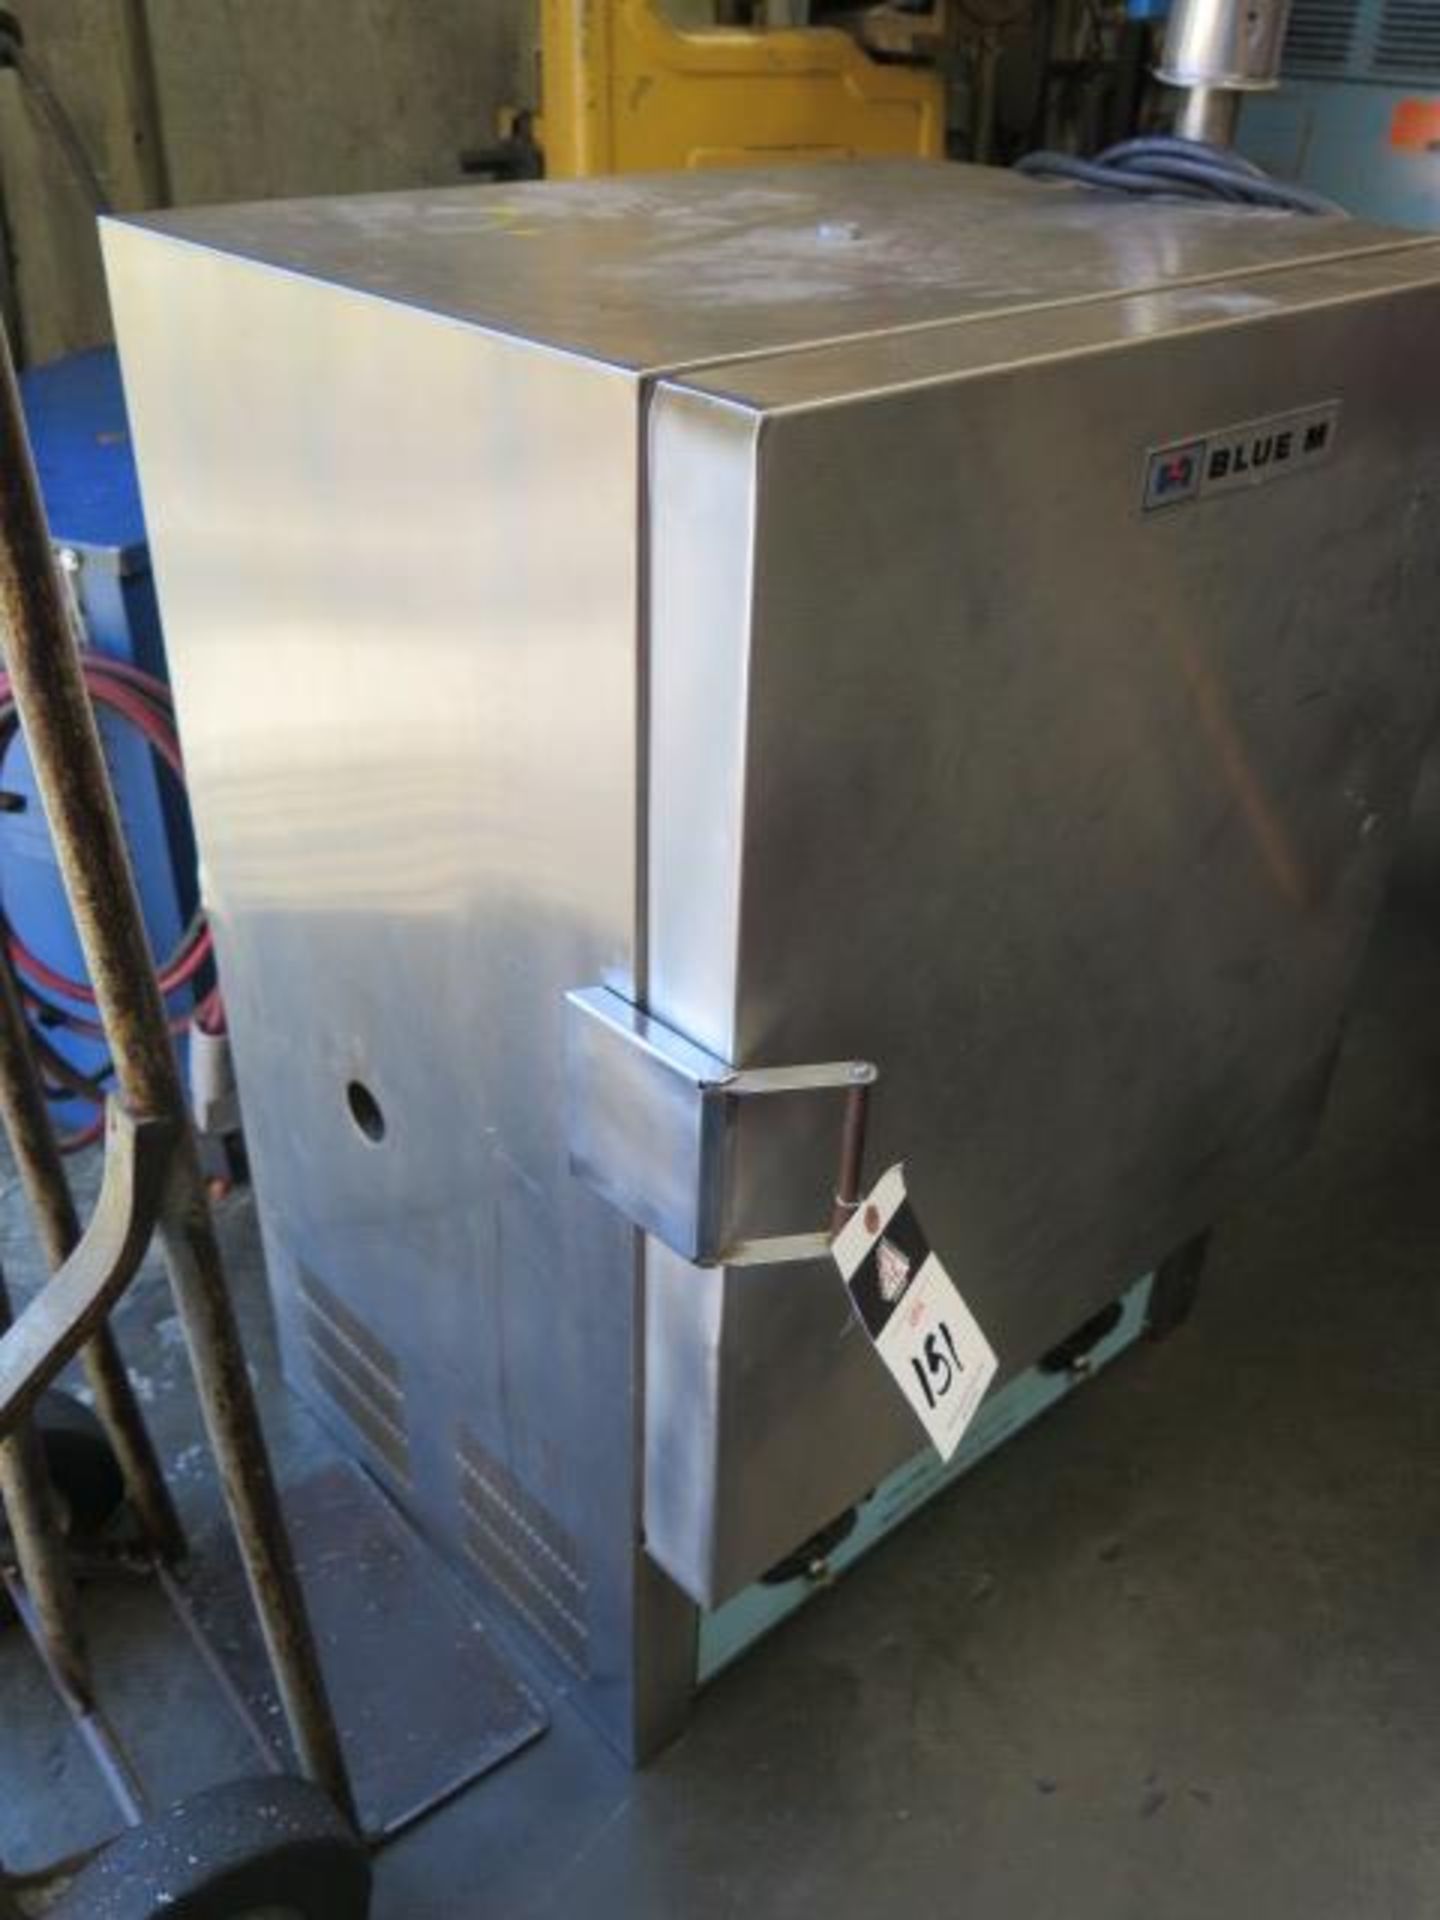 Blue-M OV-510A-2 38C to 260C / 500 Deg F Electric Oven s/n OV3-14172 (SOLD AS-IS - NO WARRANTY) - Image 2 of 6